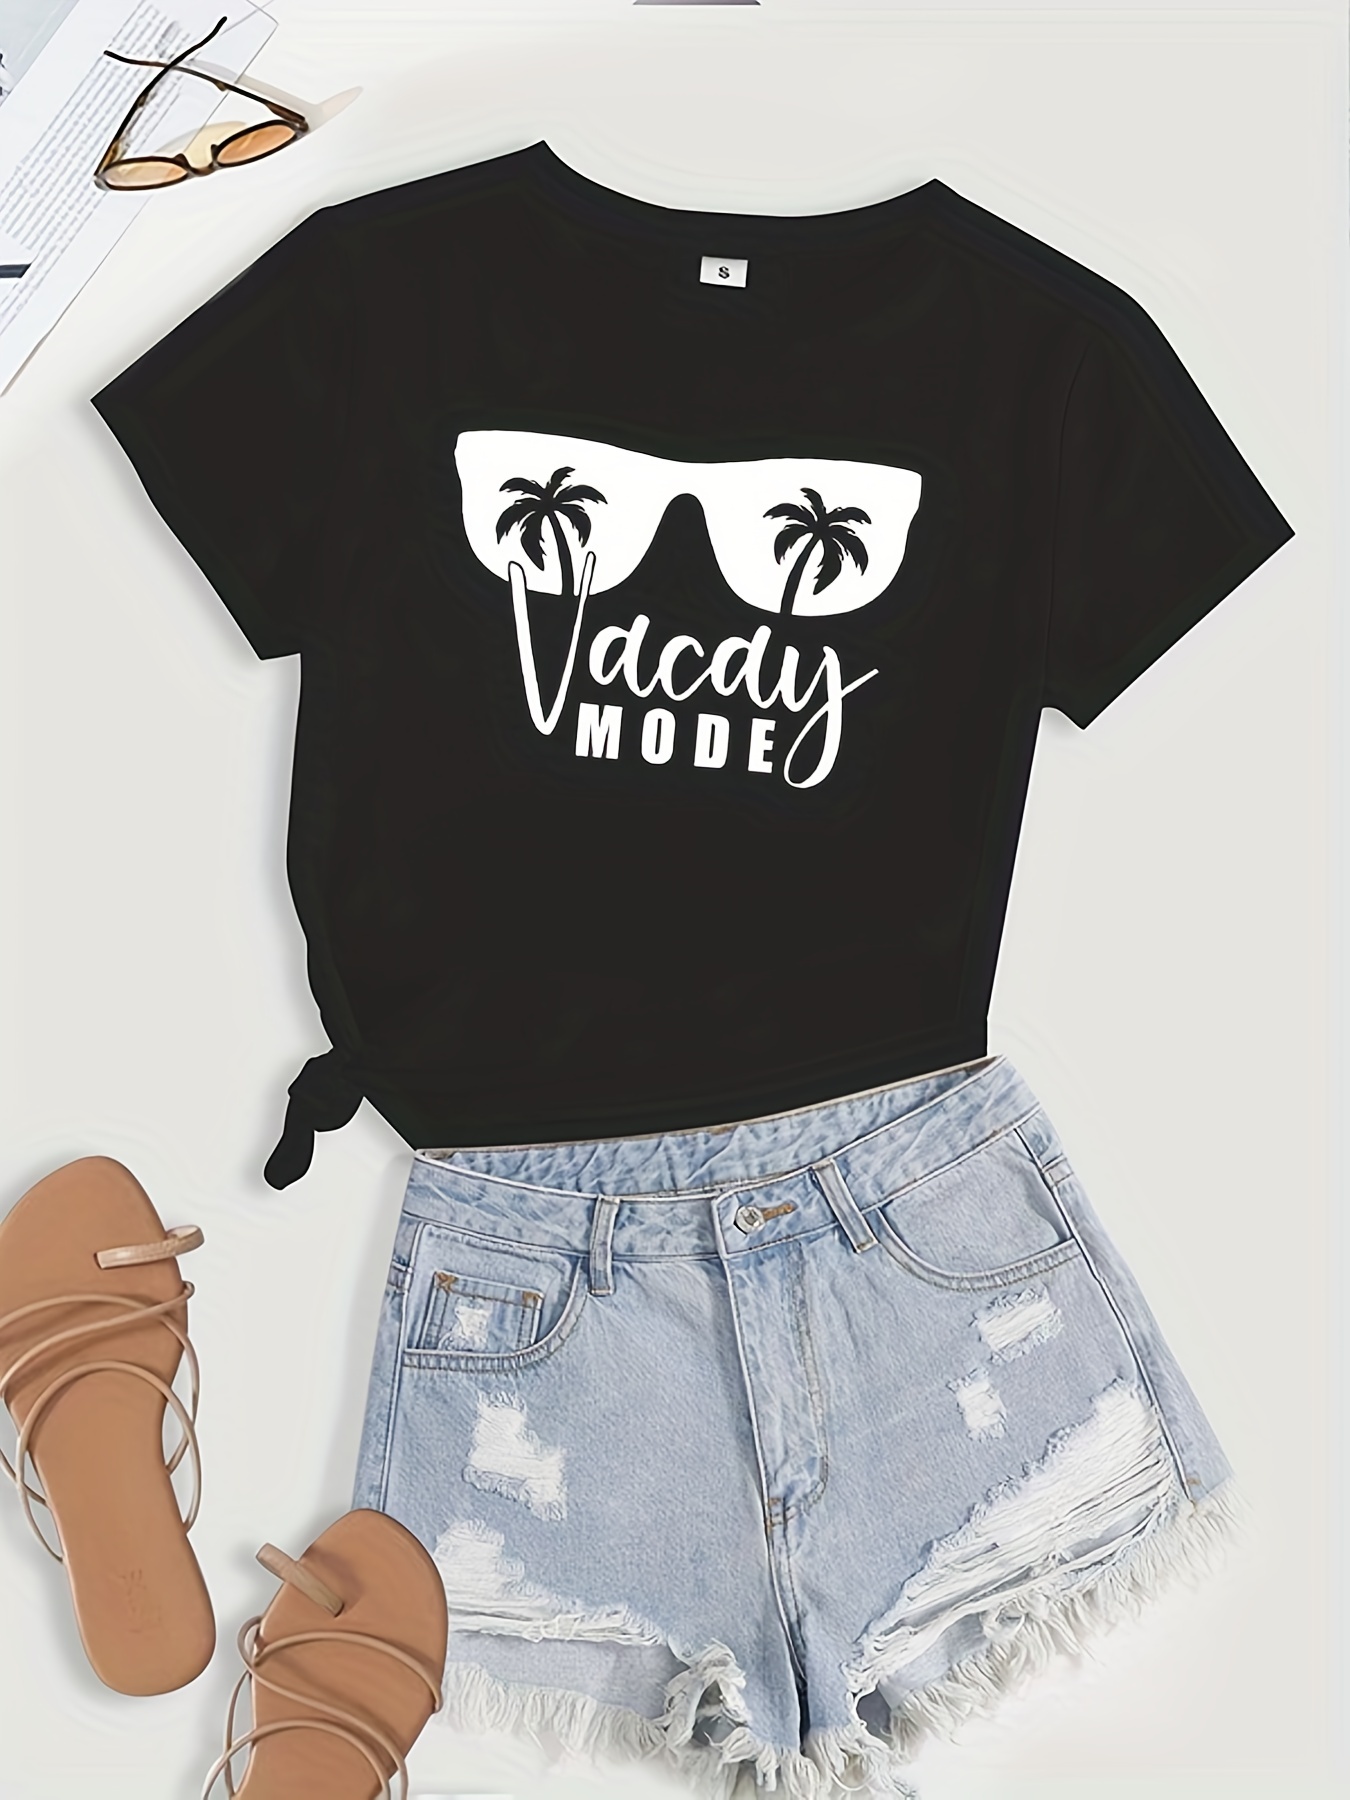 Vacation Vacay Mode On Cute Spring Break V-Neck T Shirts Tees for Men Women